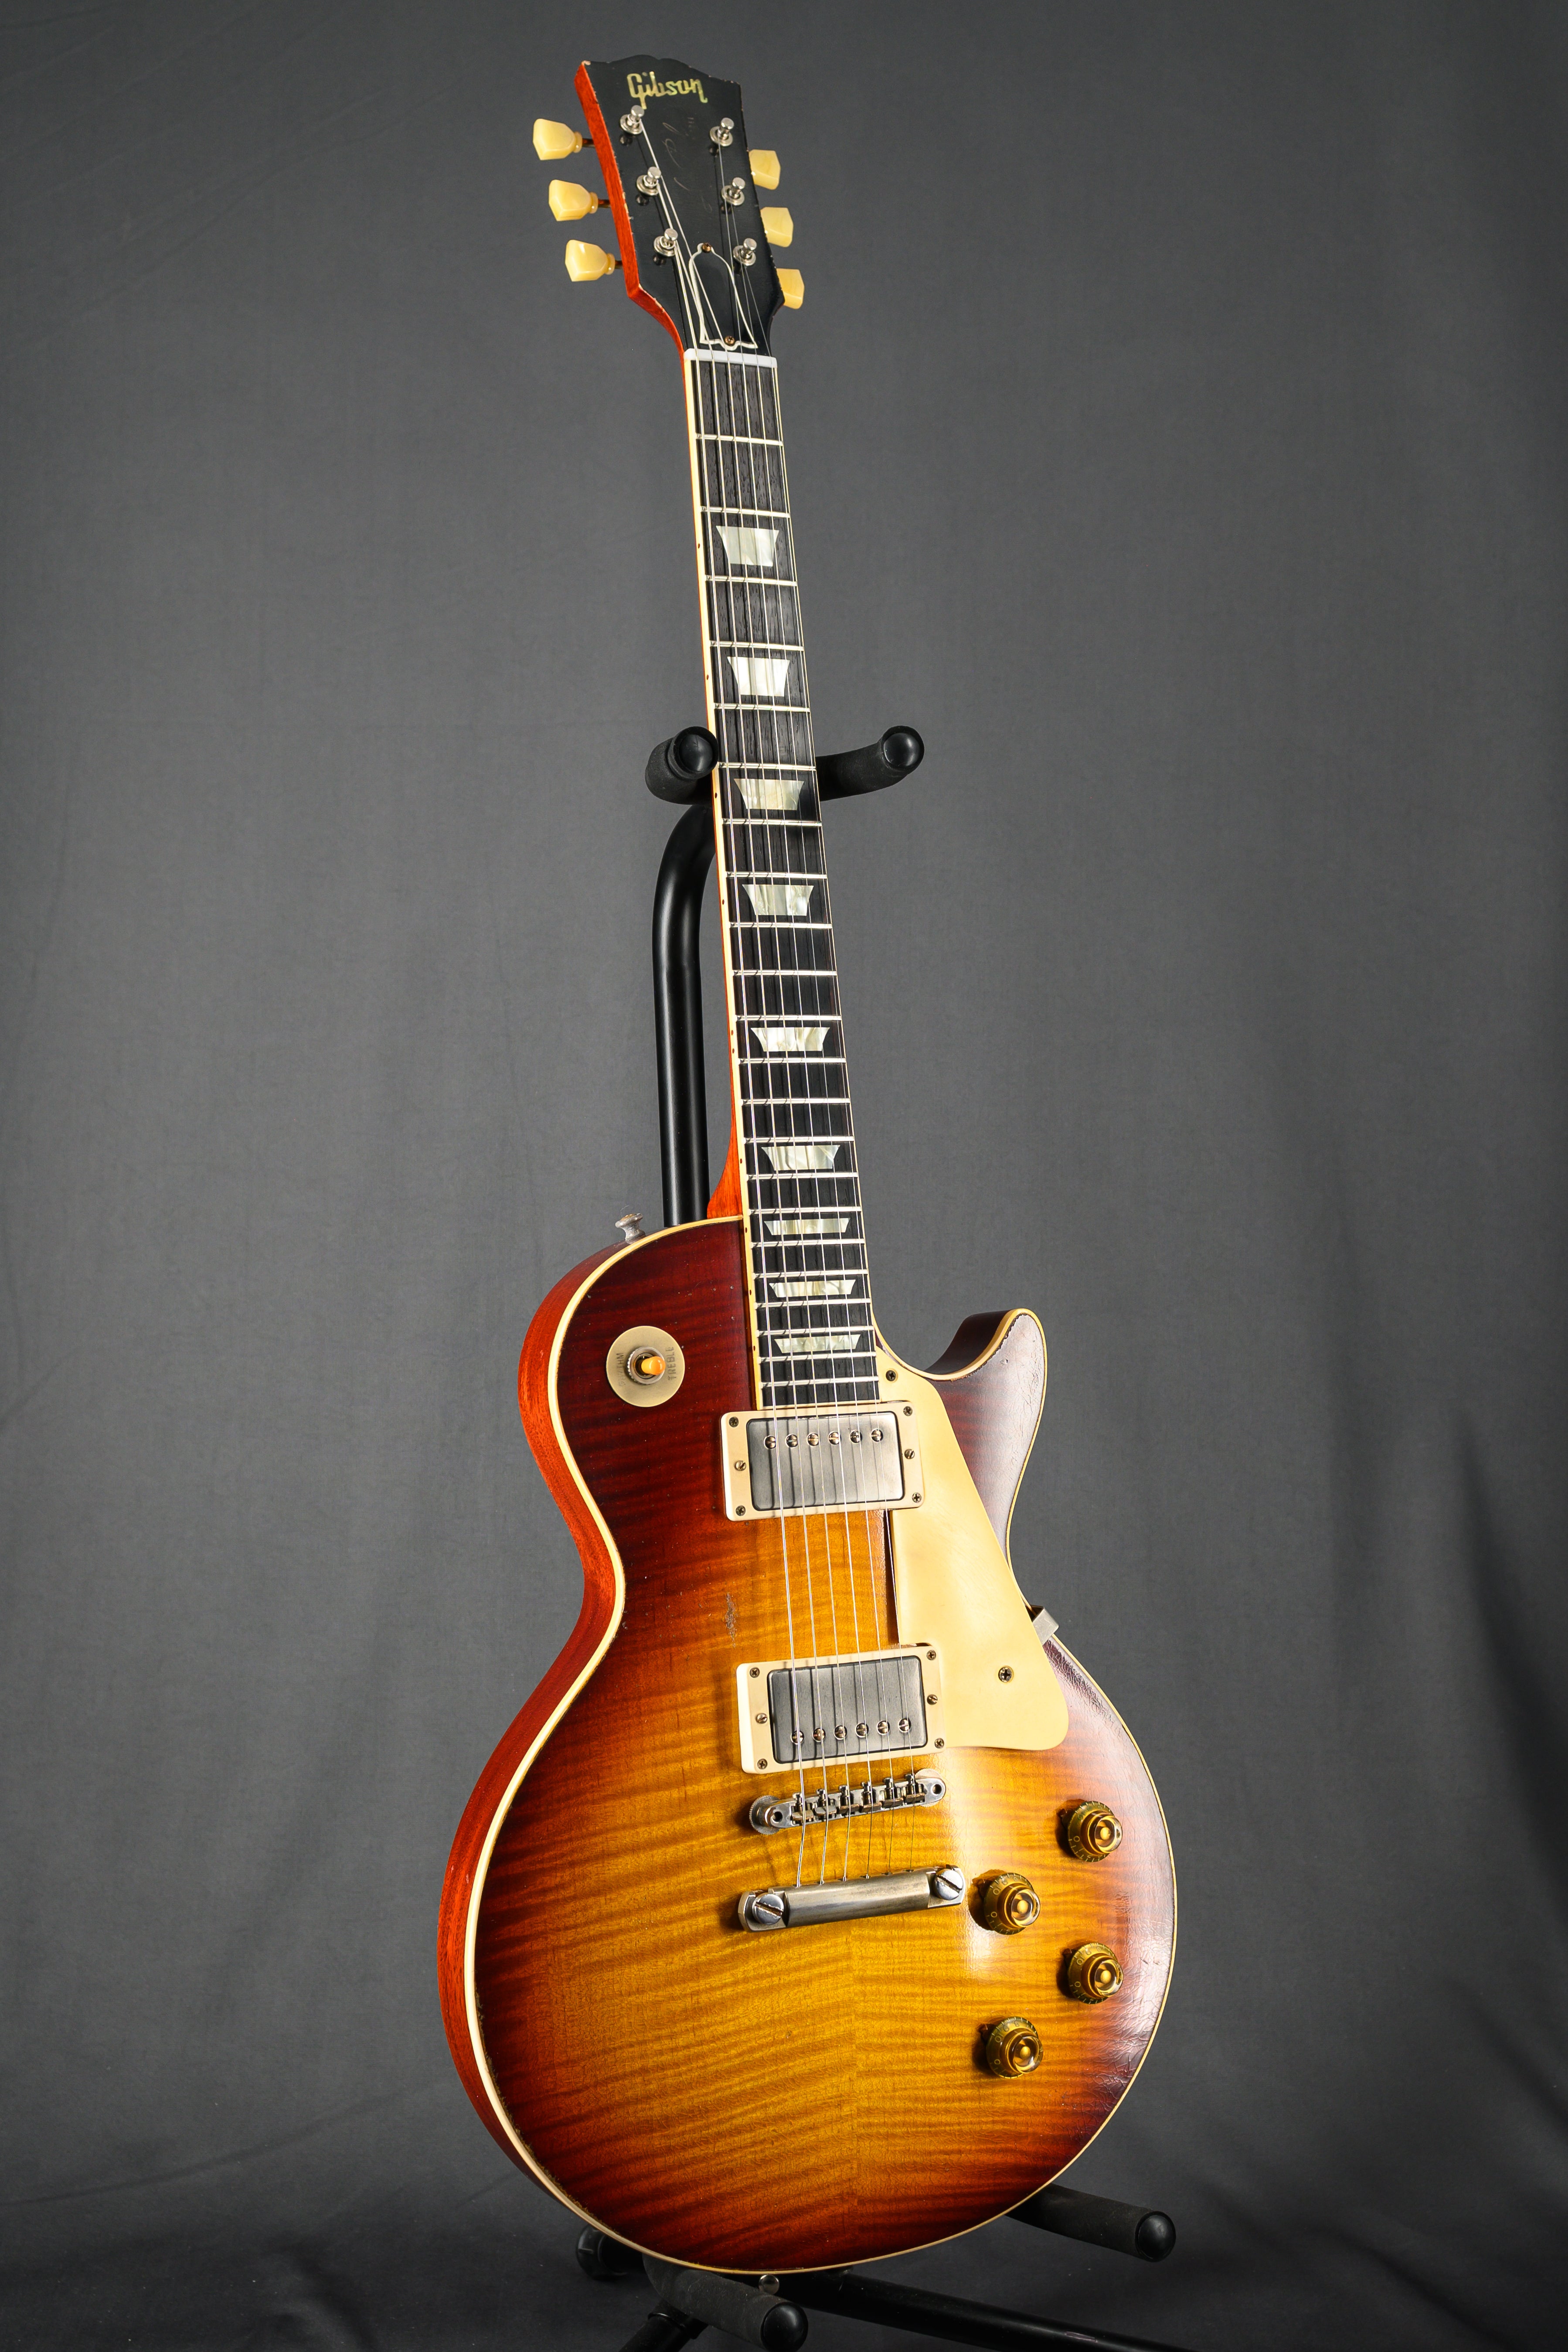 '59 Les Paul Standard Reissue Limited Edition Murphy Lab Aged With Brazilian Rosewood - Tom's Dark Burst